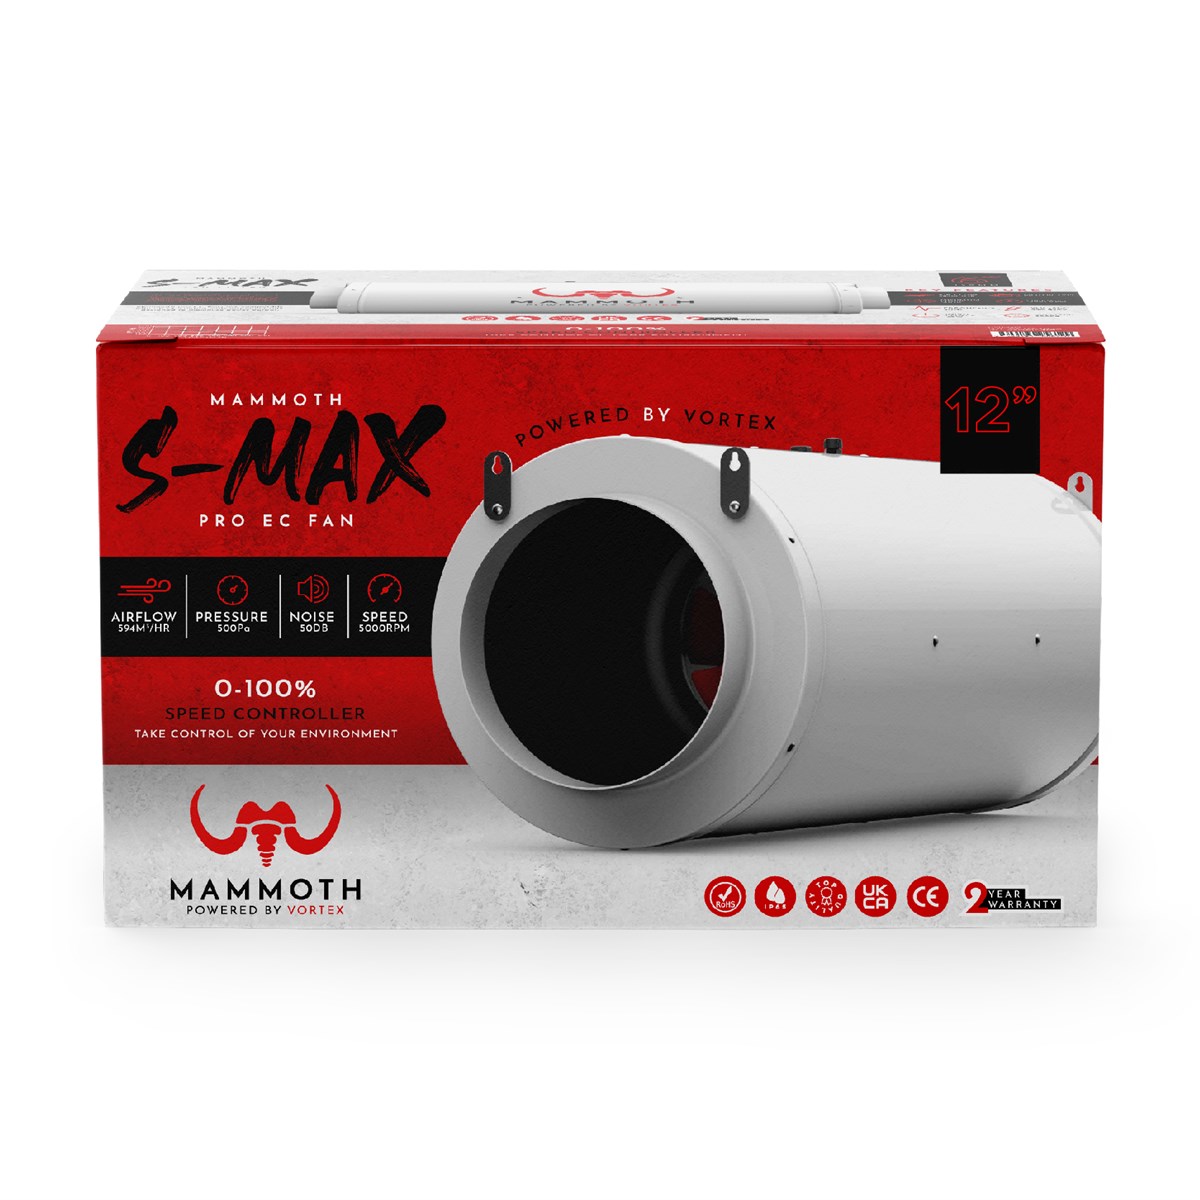 Mammoth S-Max Fans